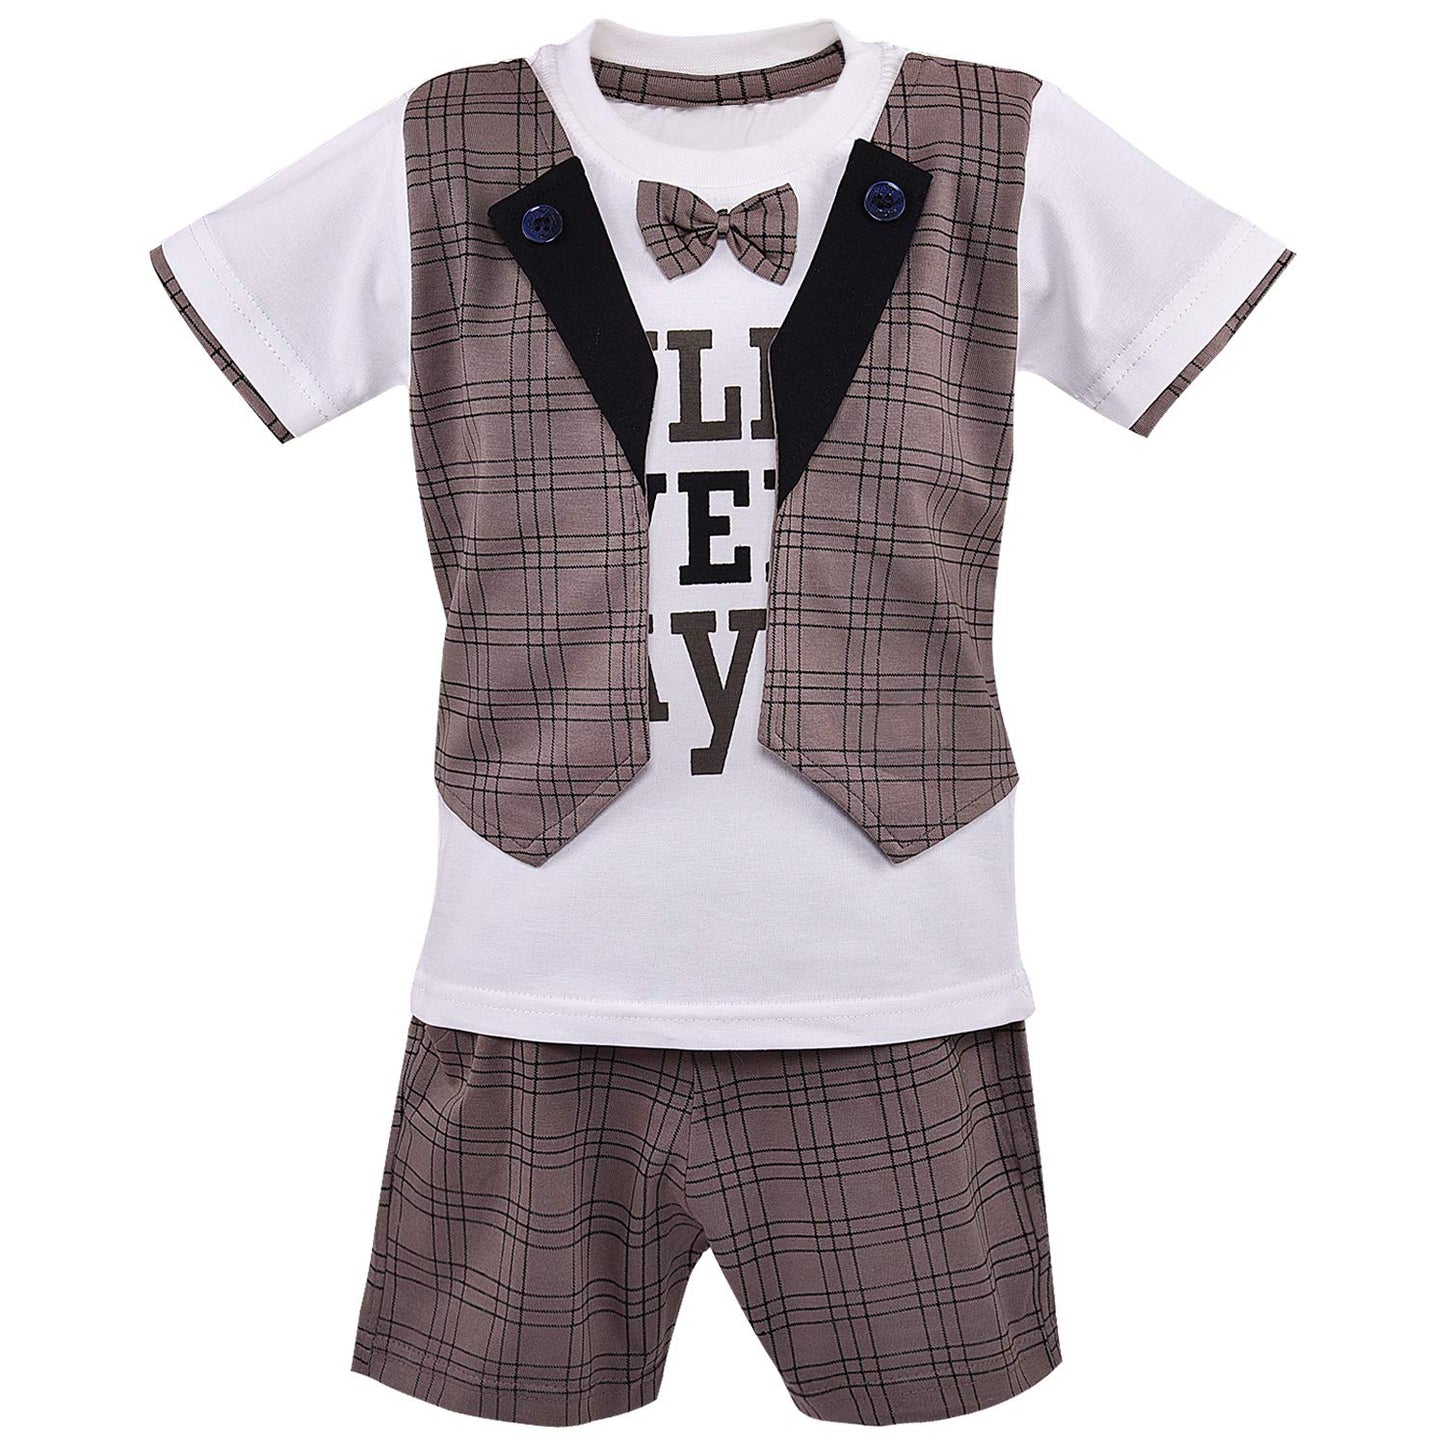 Wish Karo Baby Boys Clothing Sets for Kids-(bt43gry)